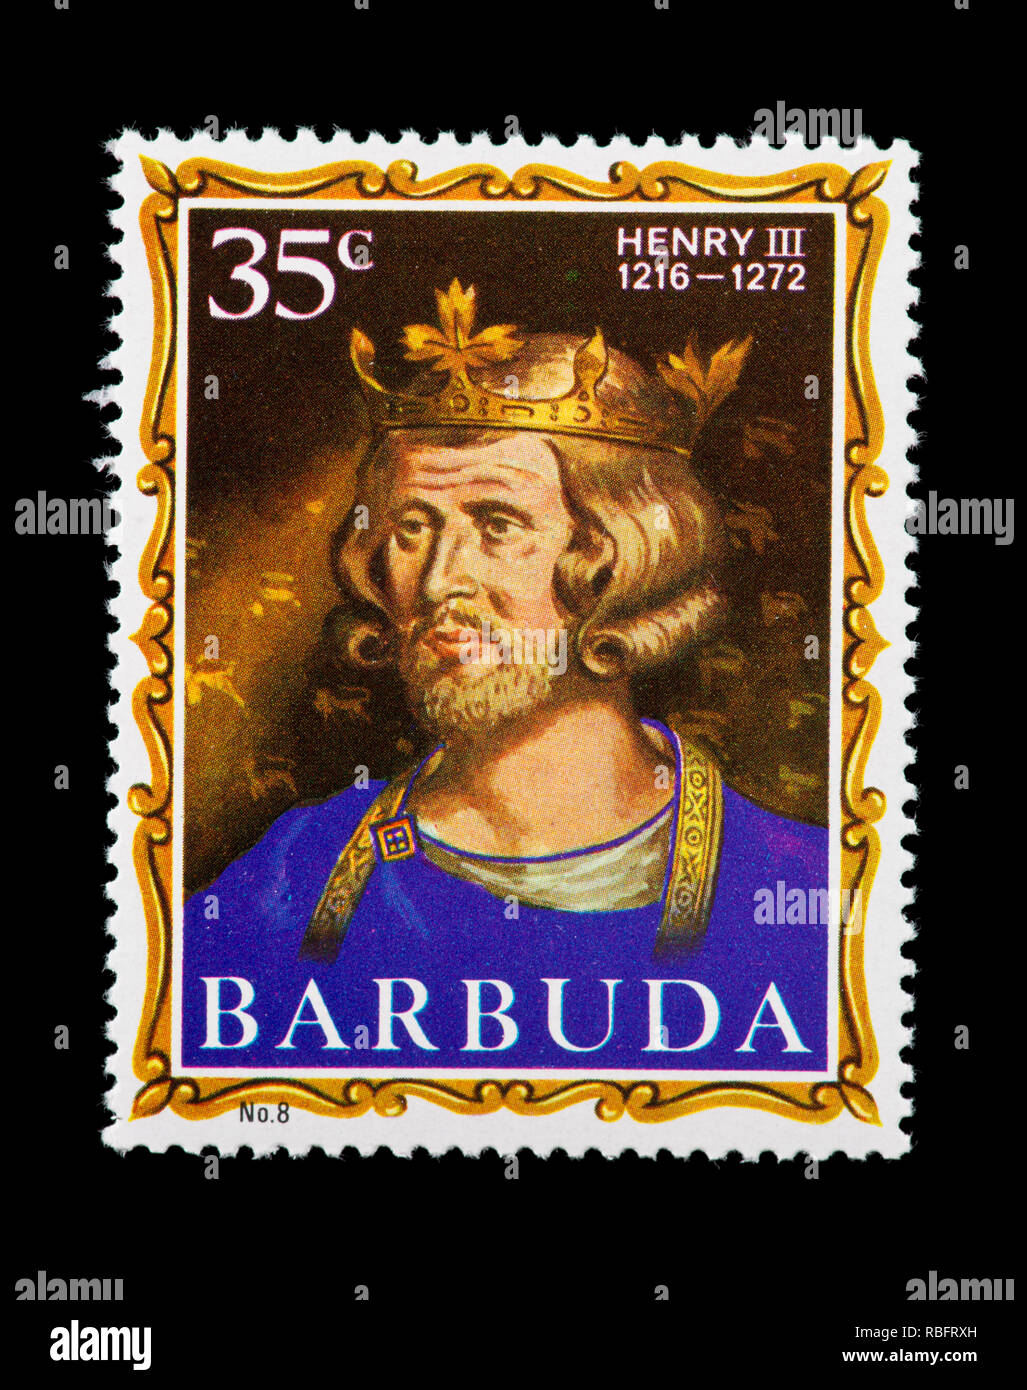 Postage stamp from Barbuda depicting Henry III, former king of England. Stock Photo